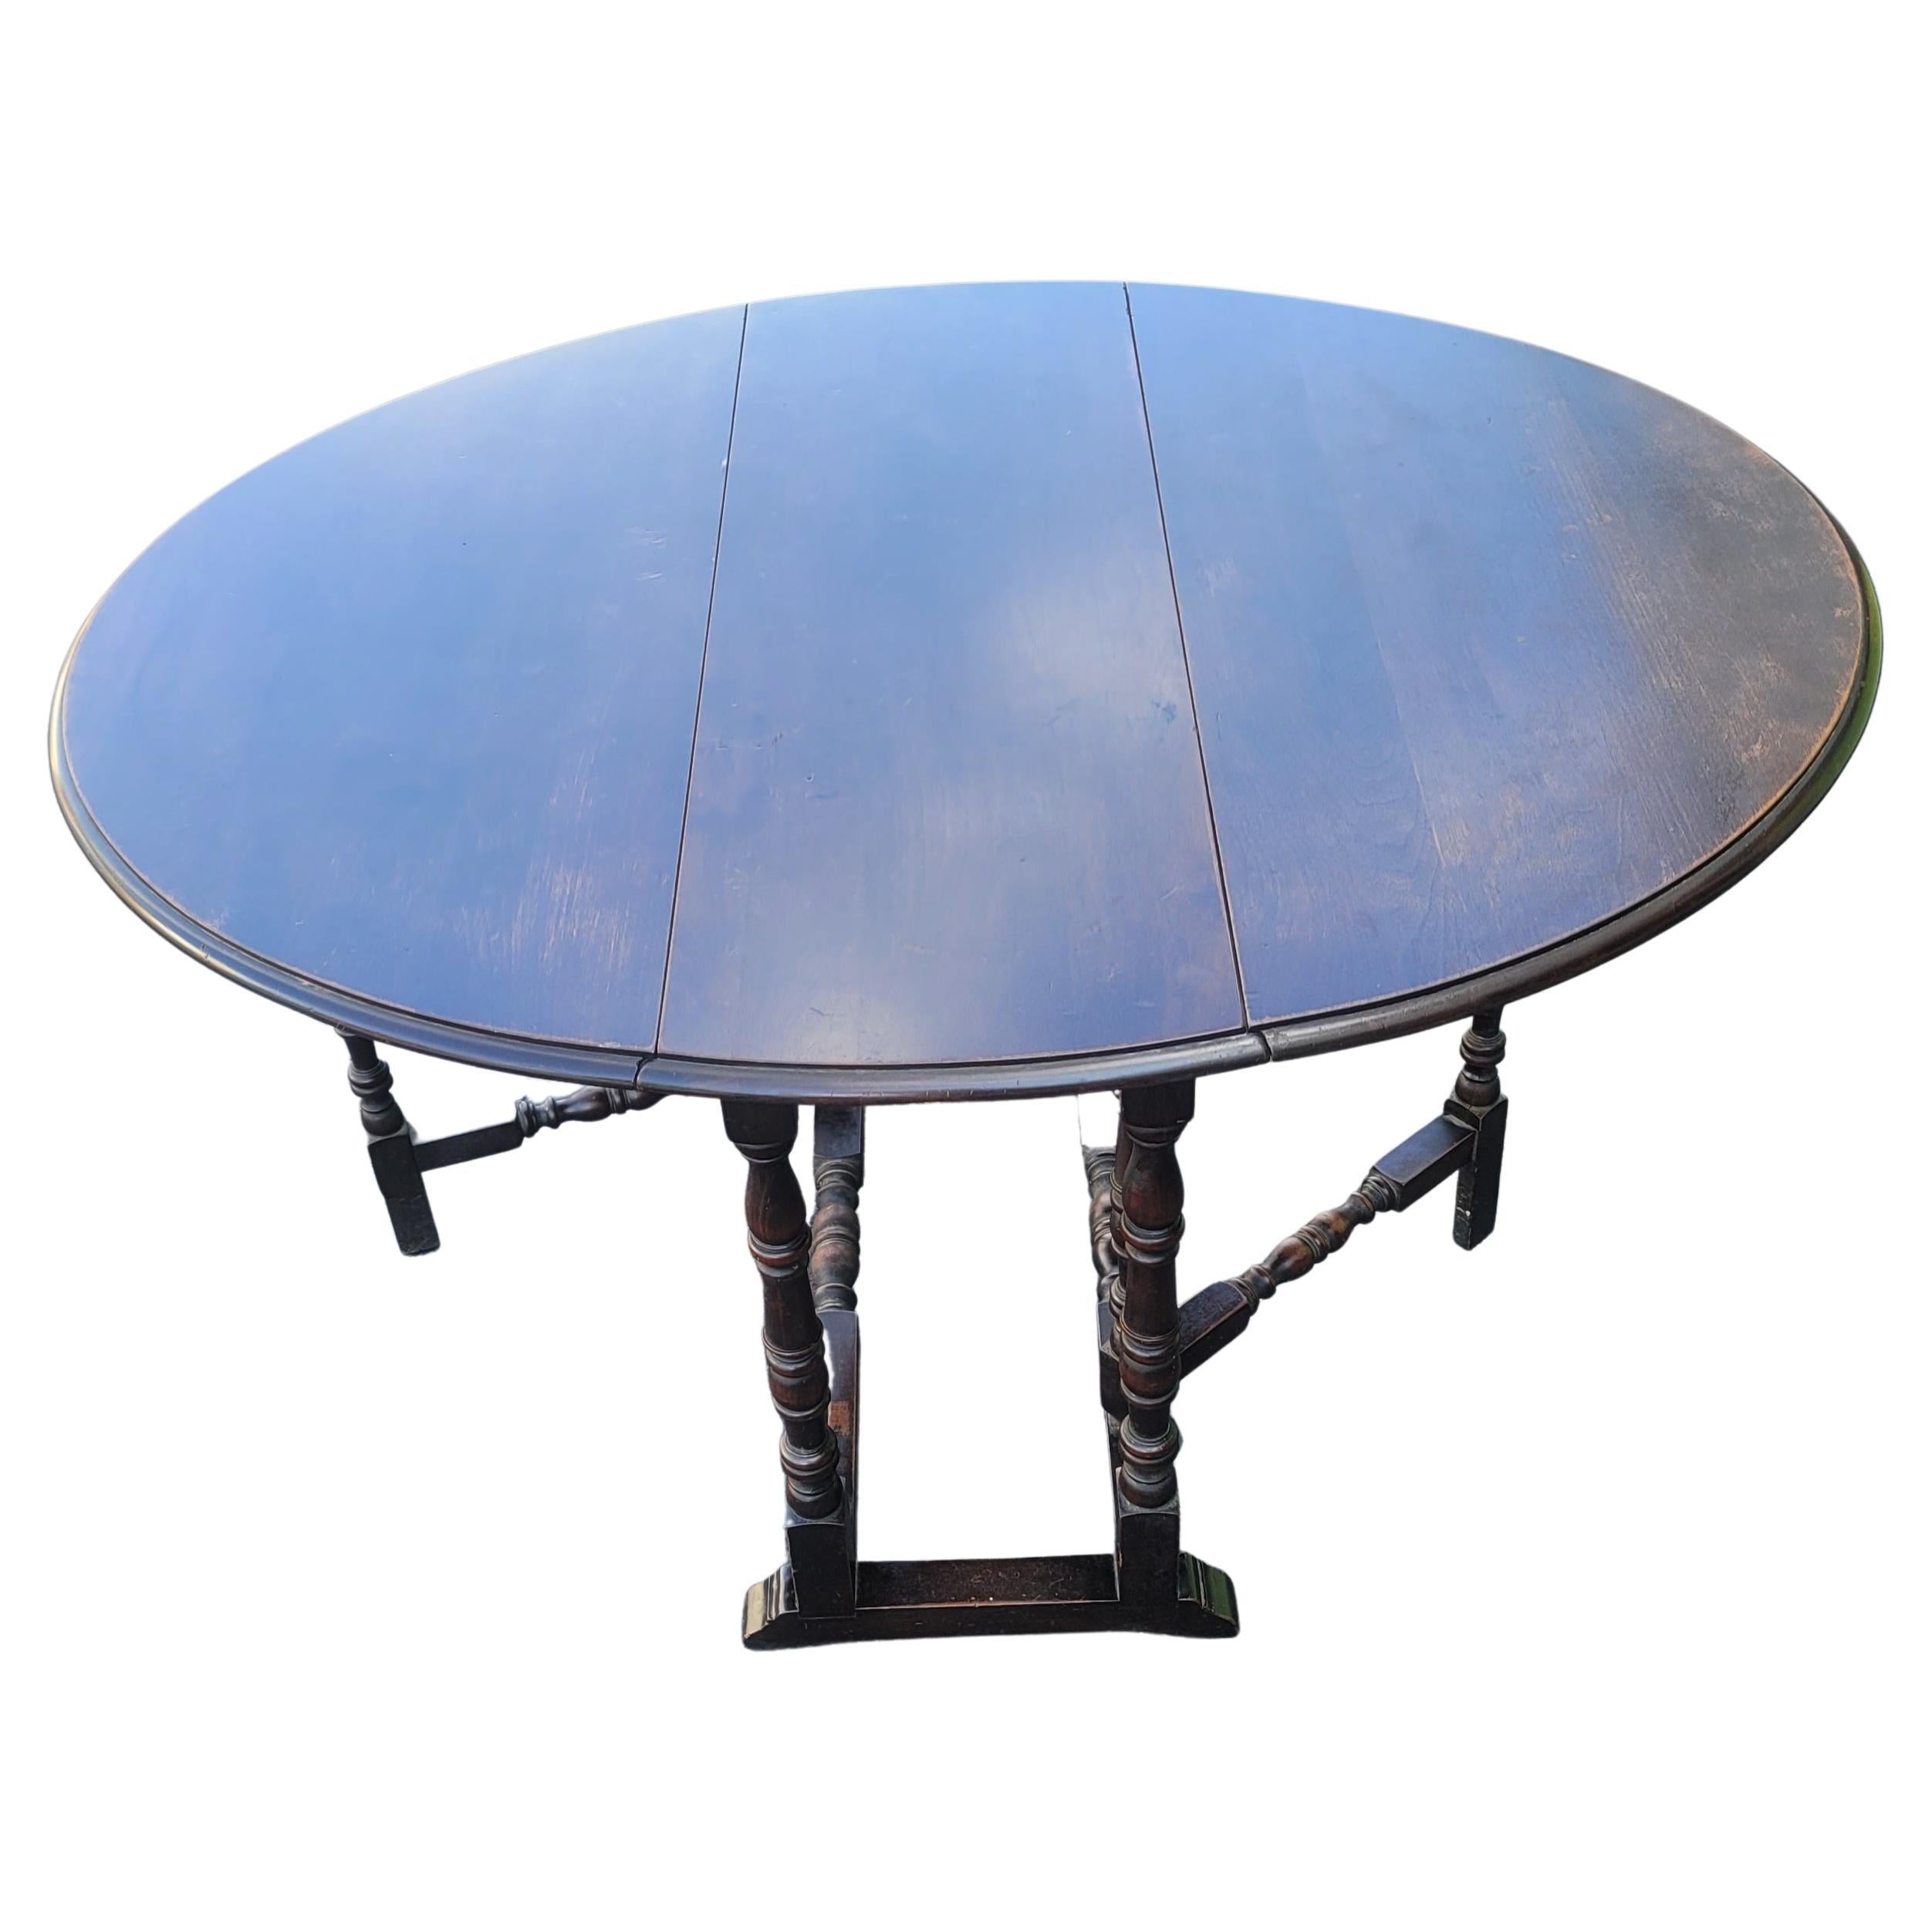 American Antique Walnut Gatelegs Oval Table, Circa 1910s For Sale